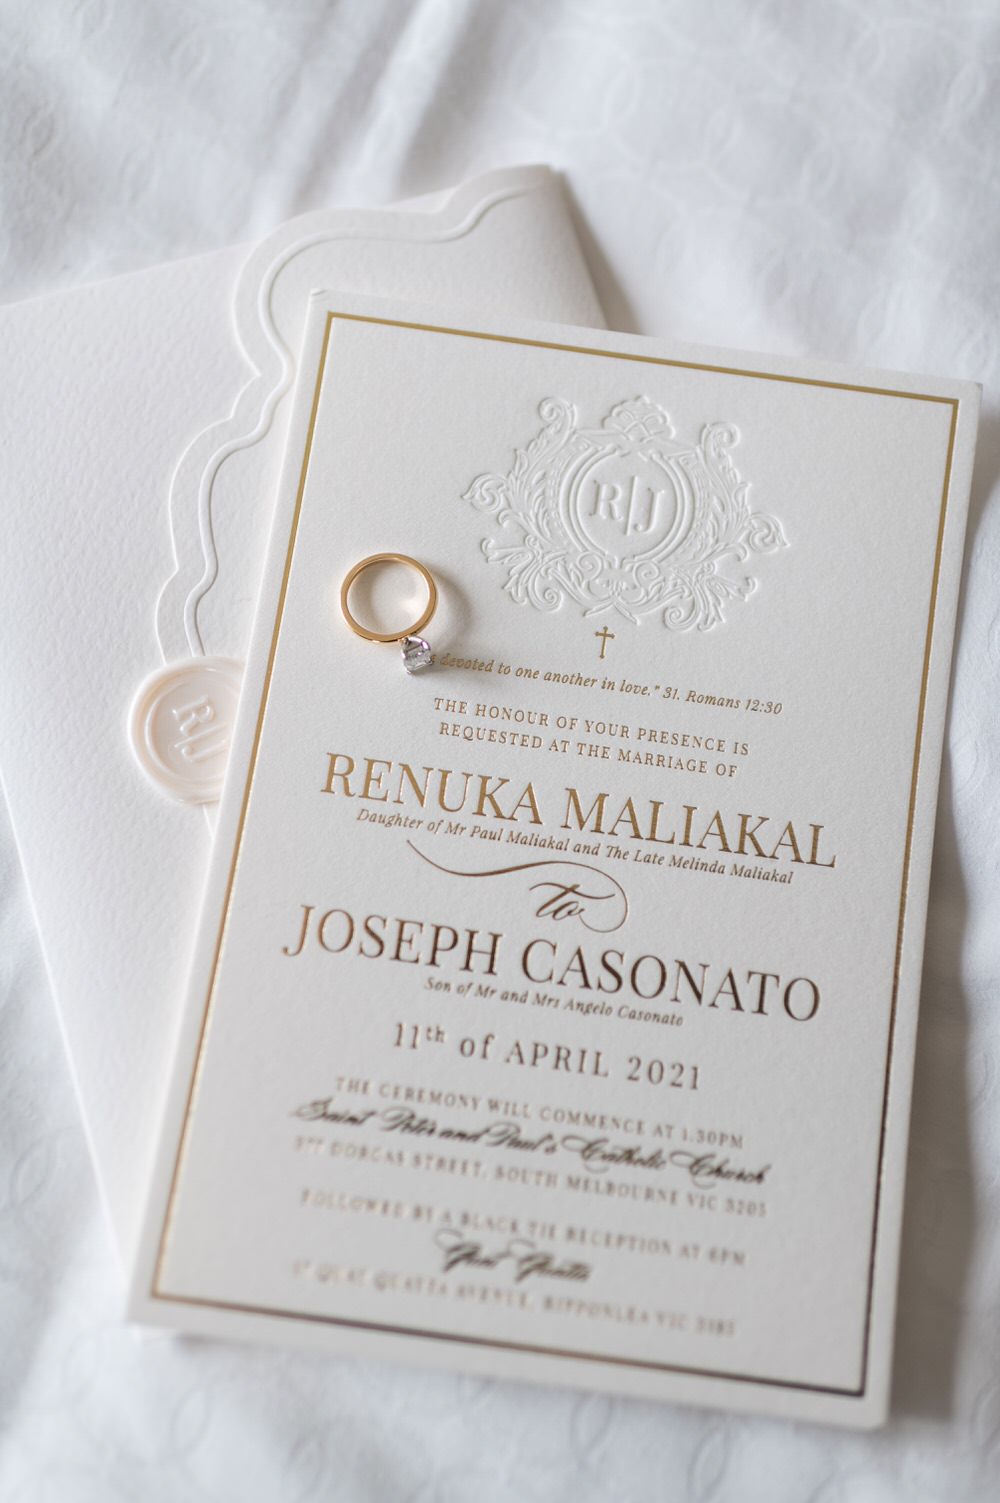 Simple white and gold wedding invitation for an Italian-style wedding